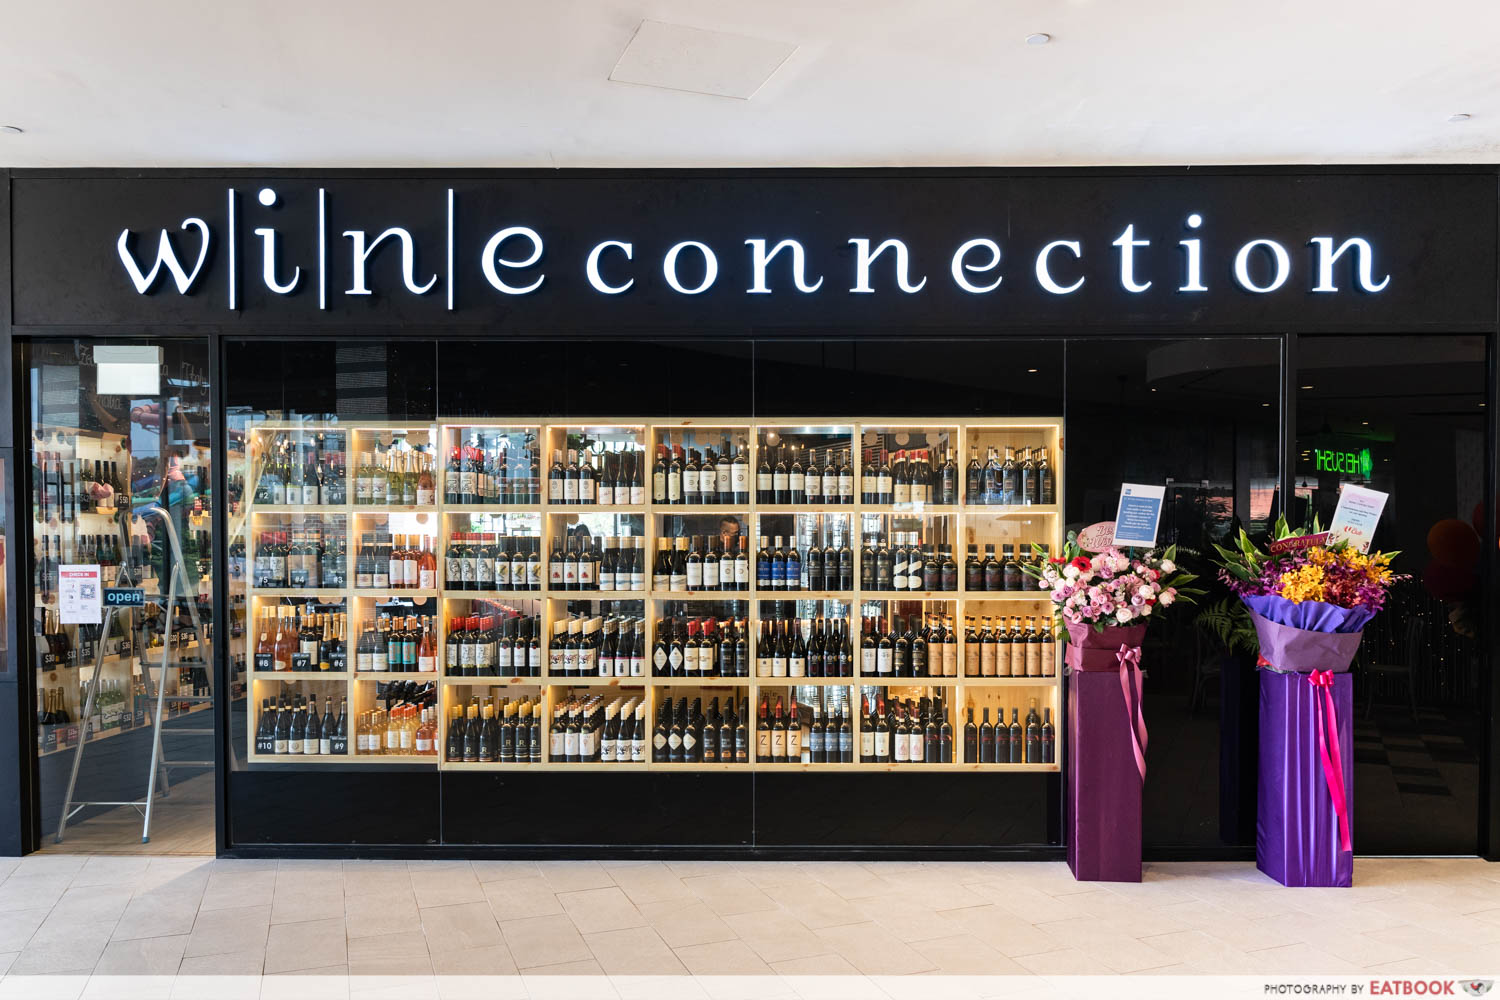 wine connection - storefront